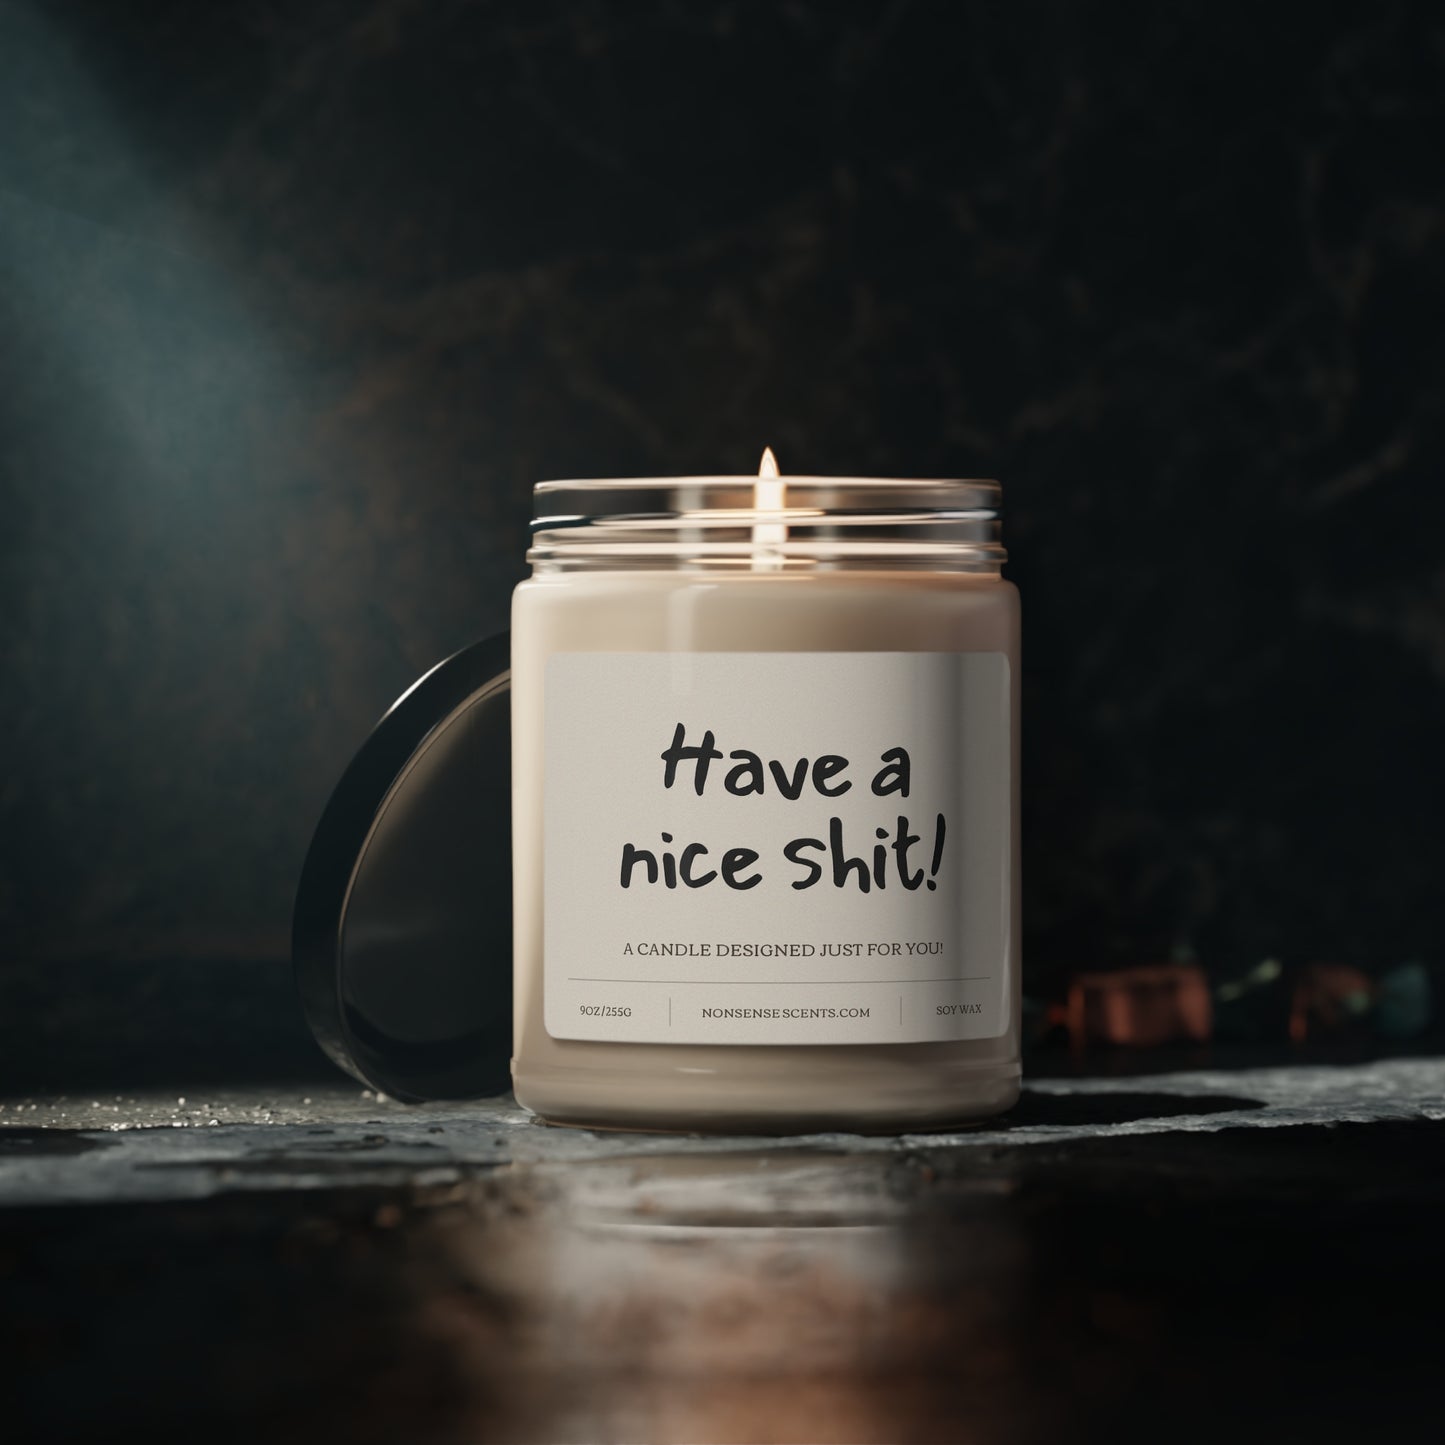 "Have A Nice Shit!" Scented Candle